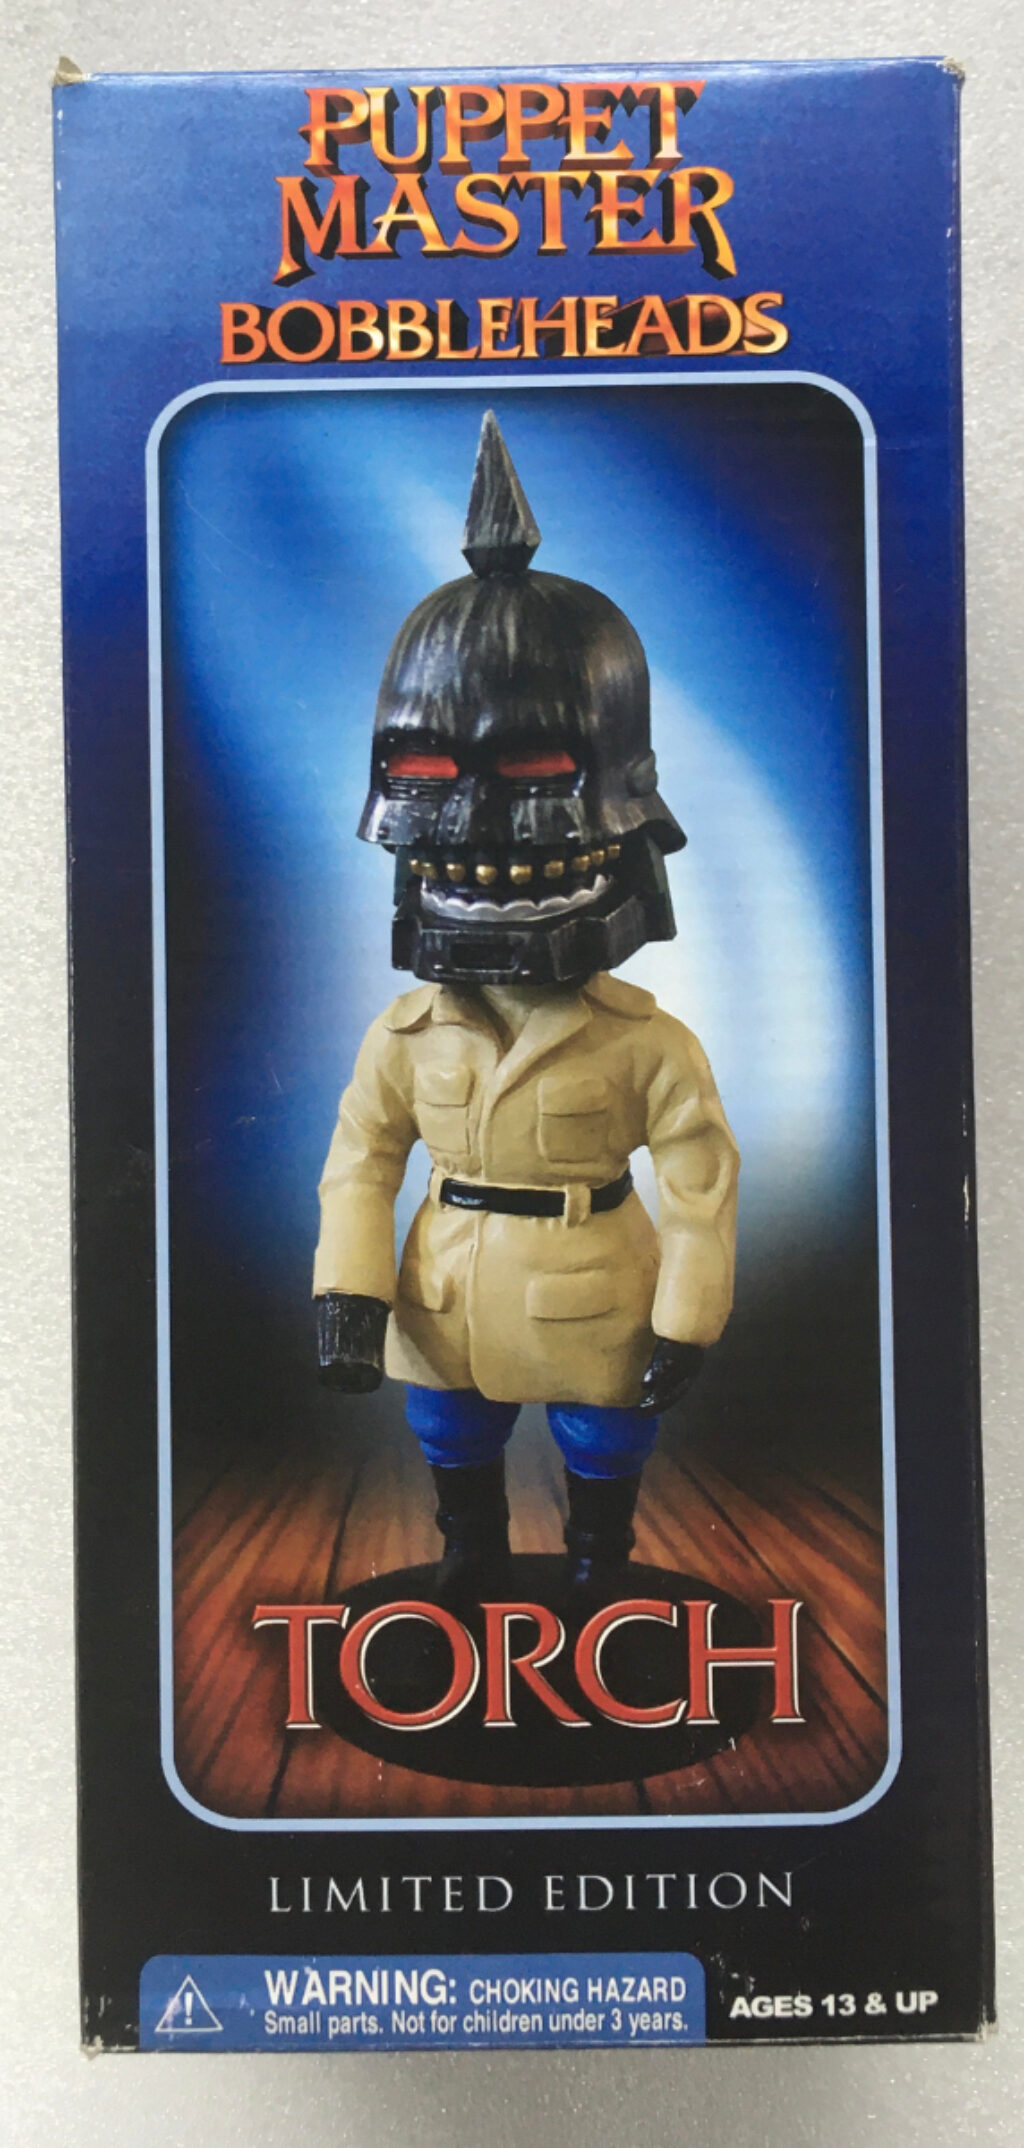 Full Moon Features Puppet Master Torch Bobblehead